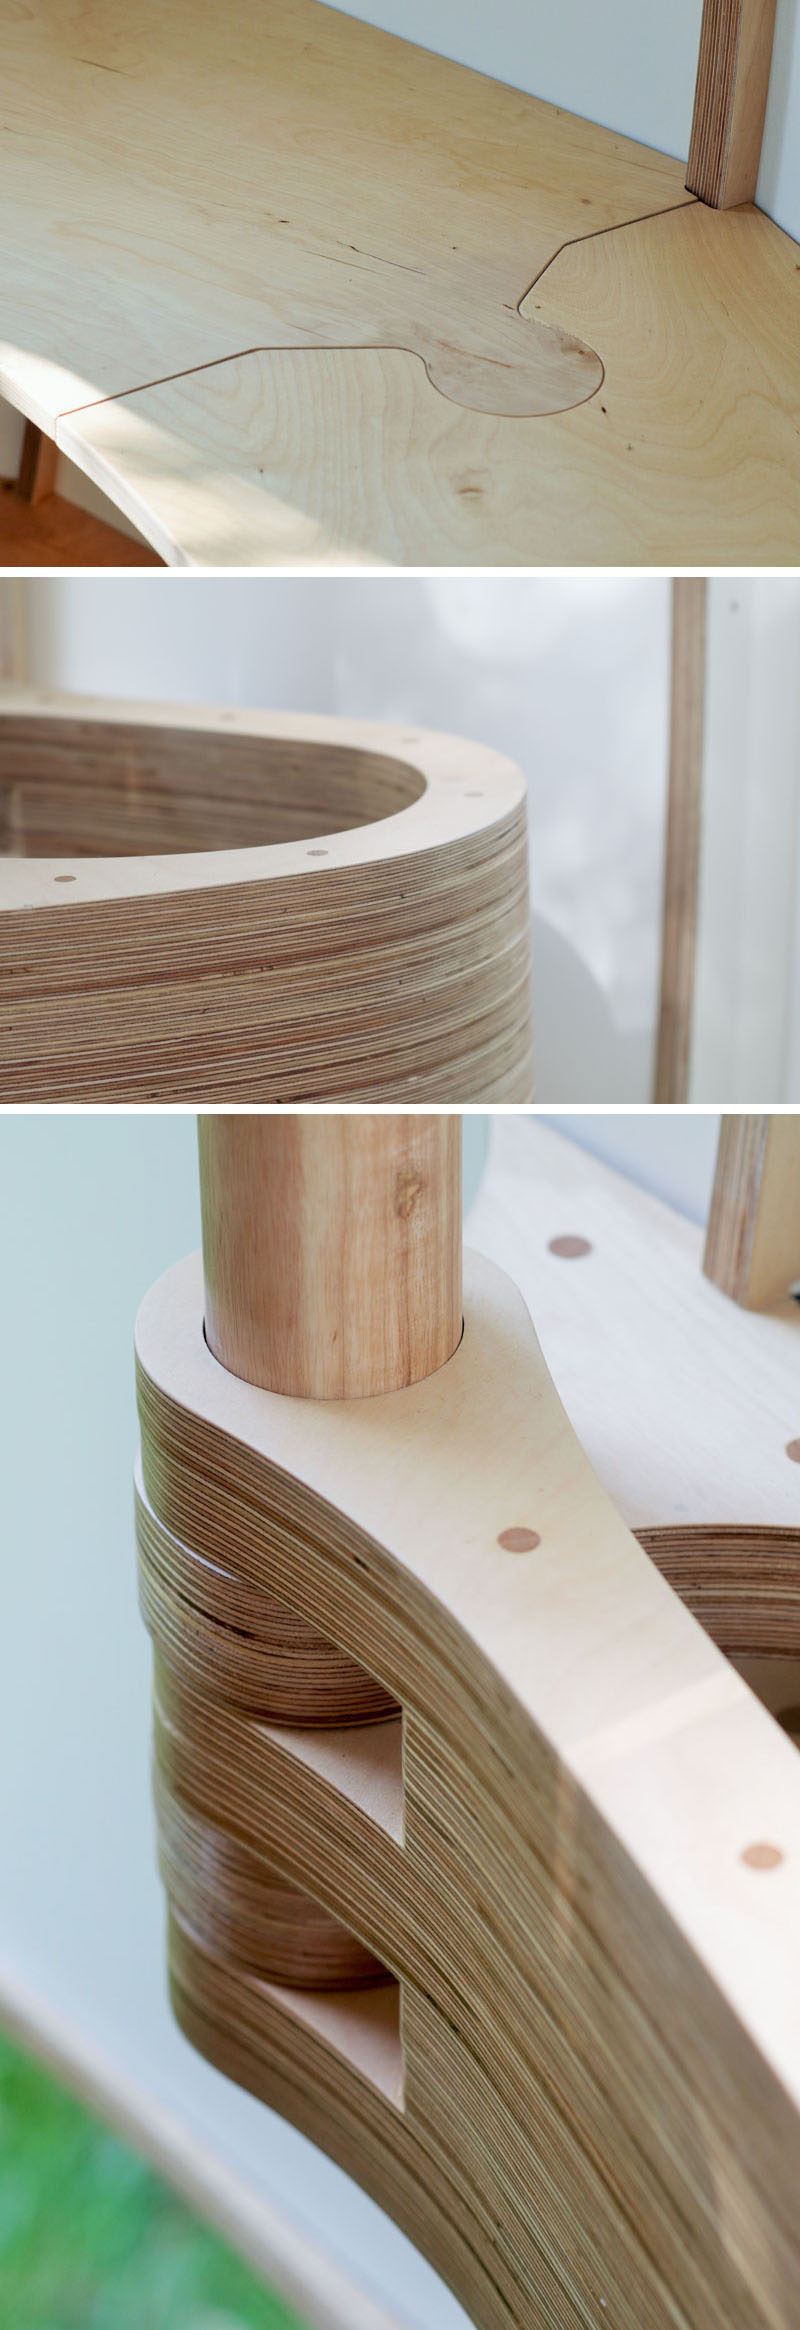 Examples of CNC milled woodwork featured in a pod-like backyard studio. #CNC #Woodworking